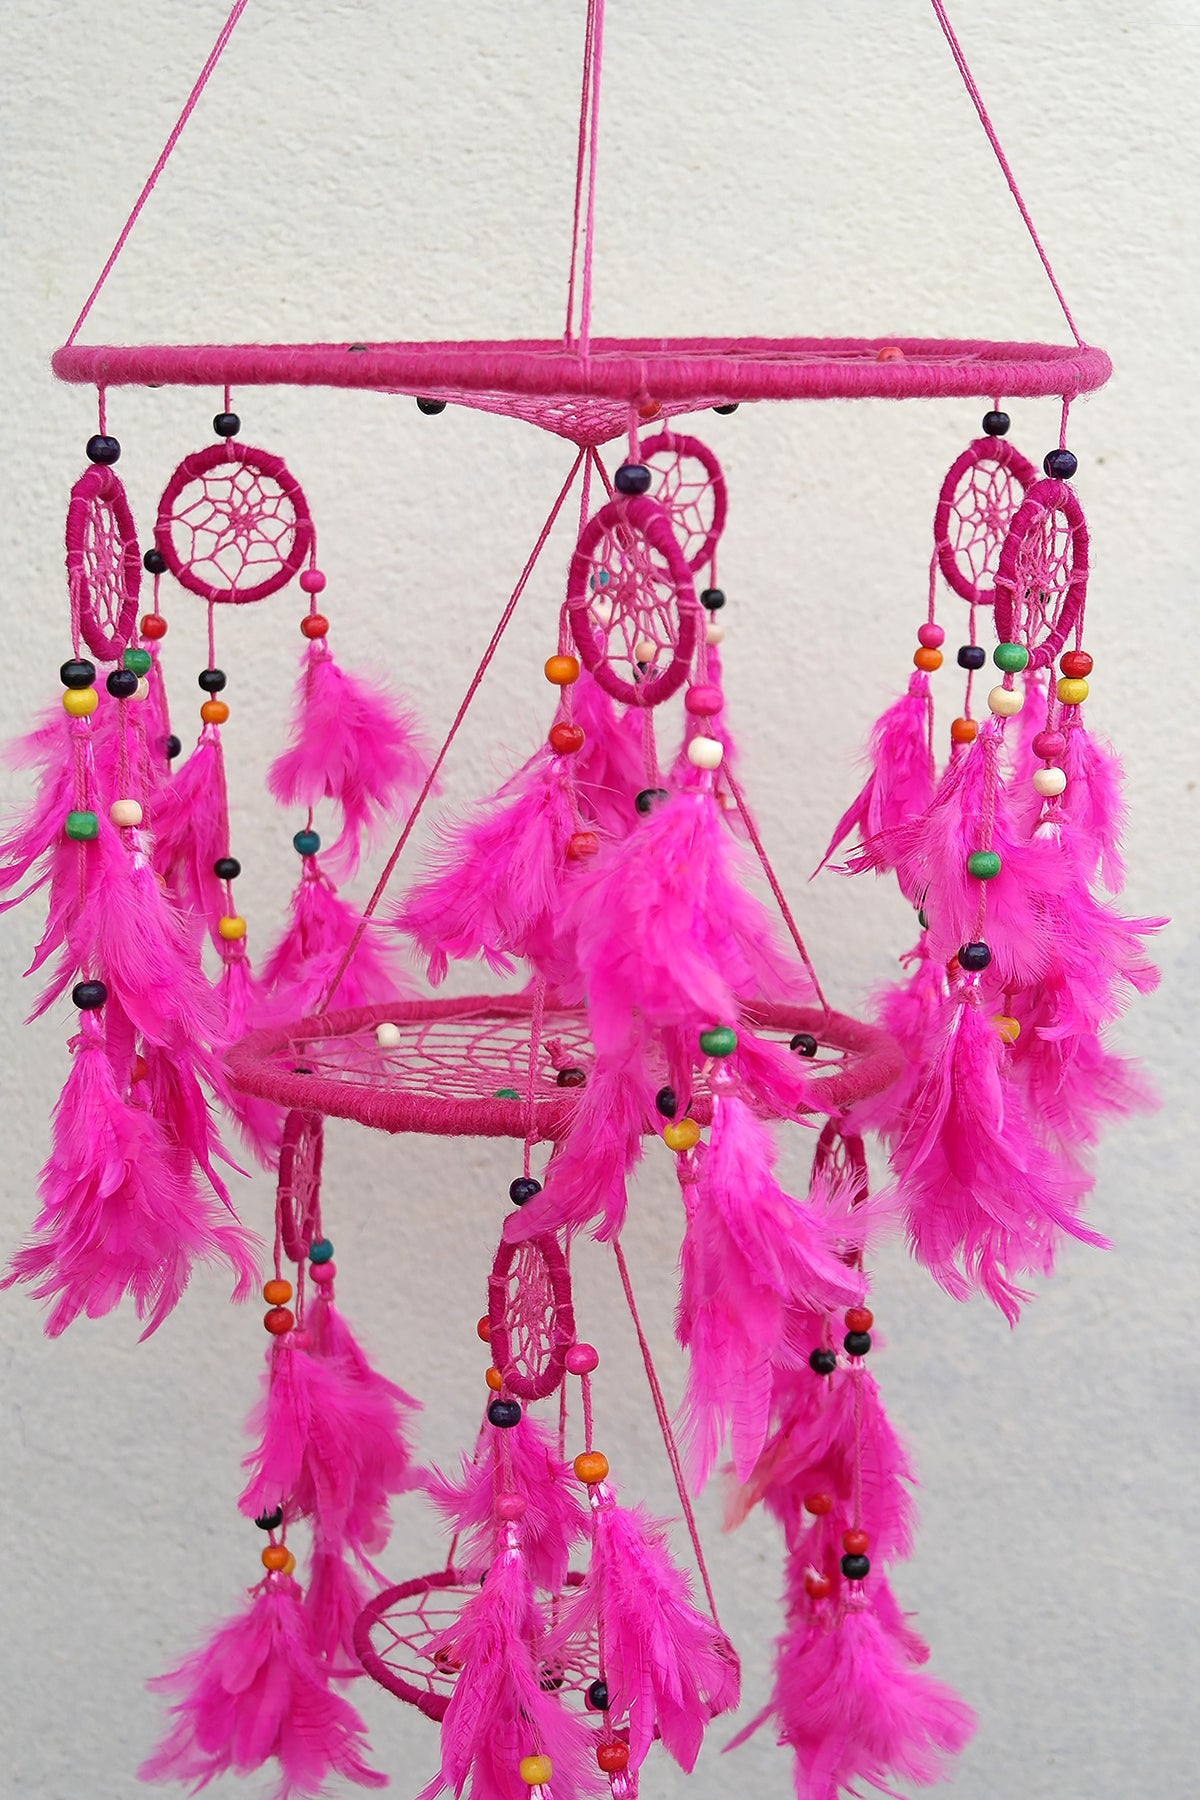 Pink Large Handmade Dream Catcher Feather Hanging